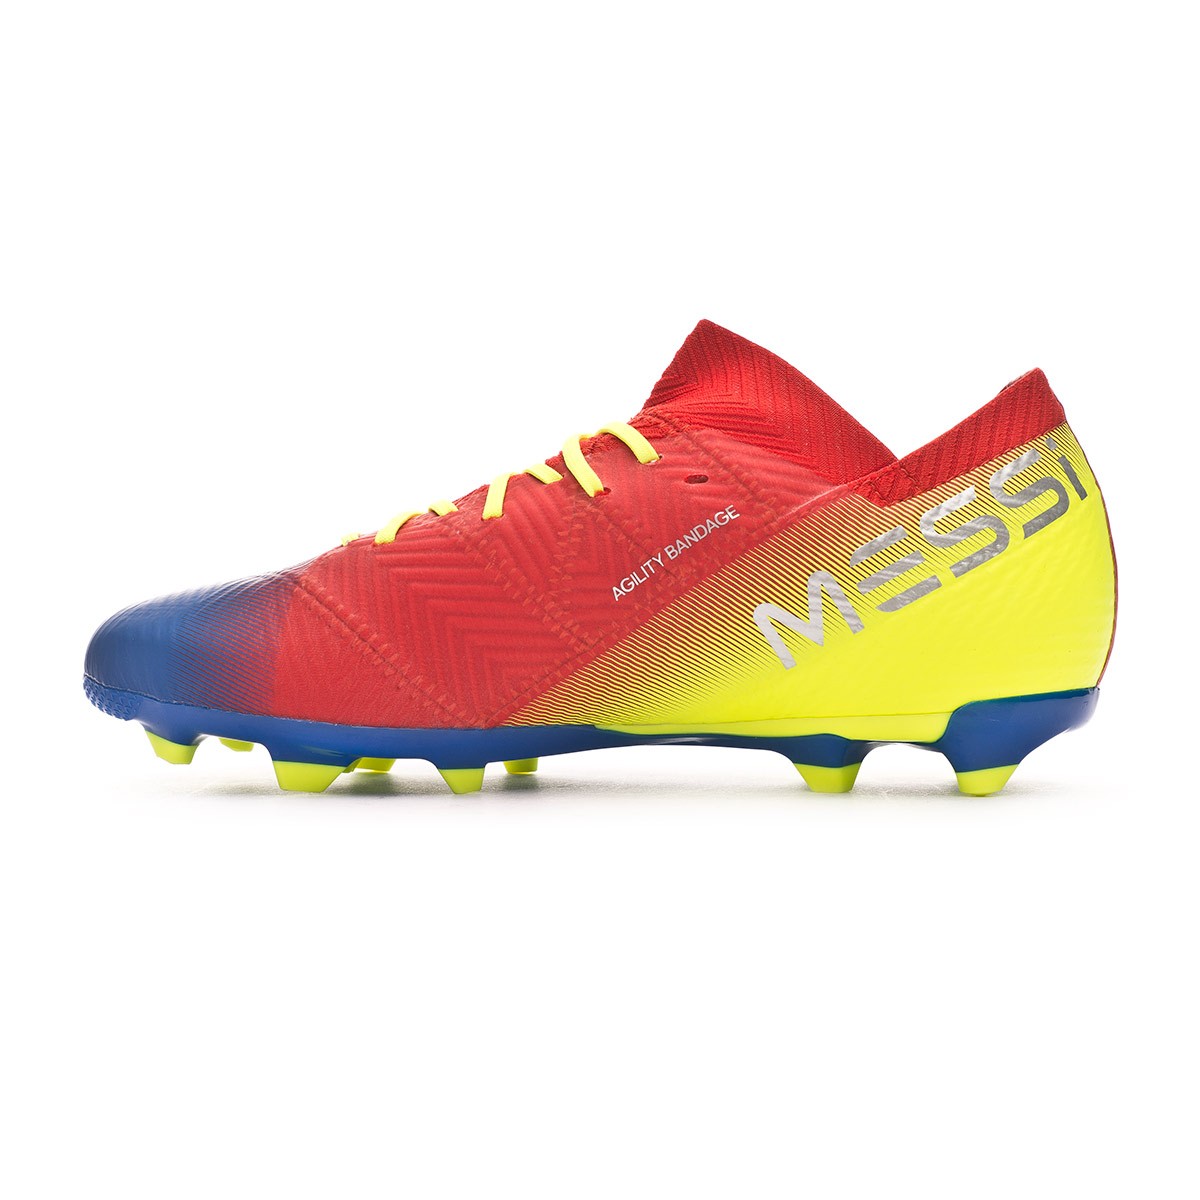 blue messi football boots